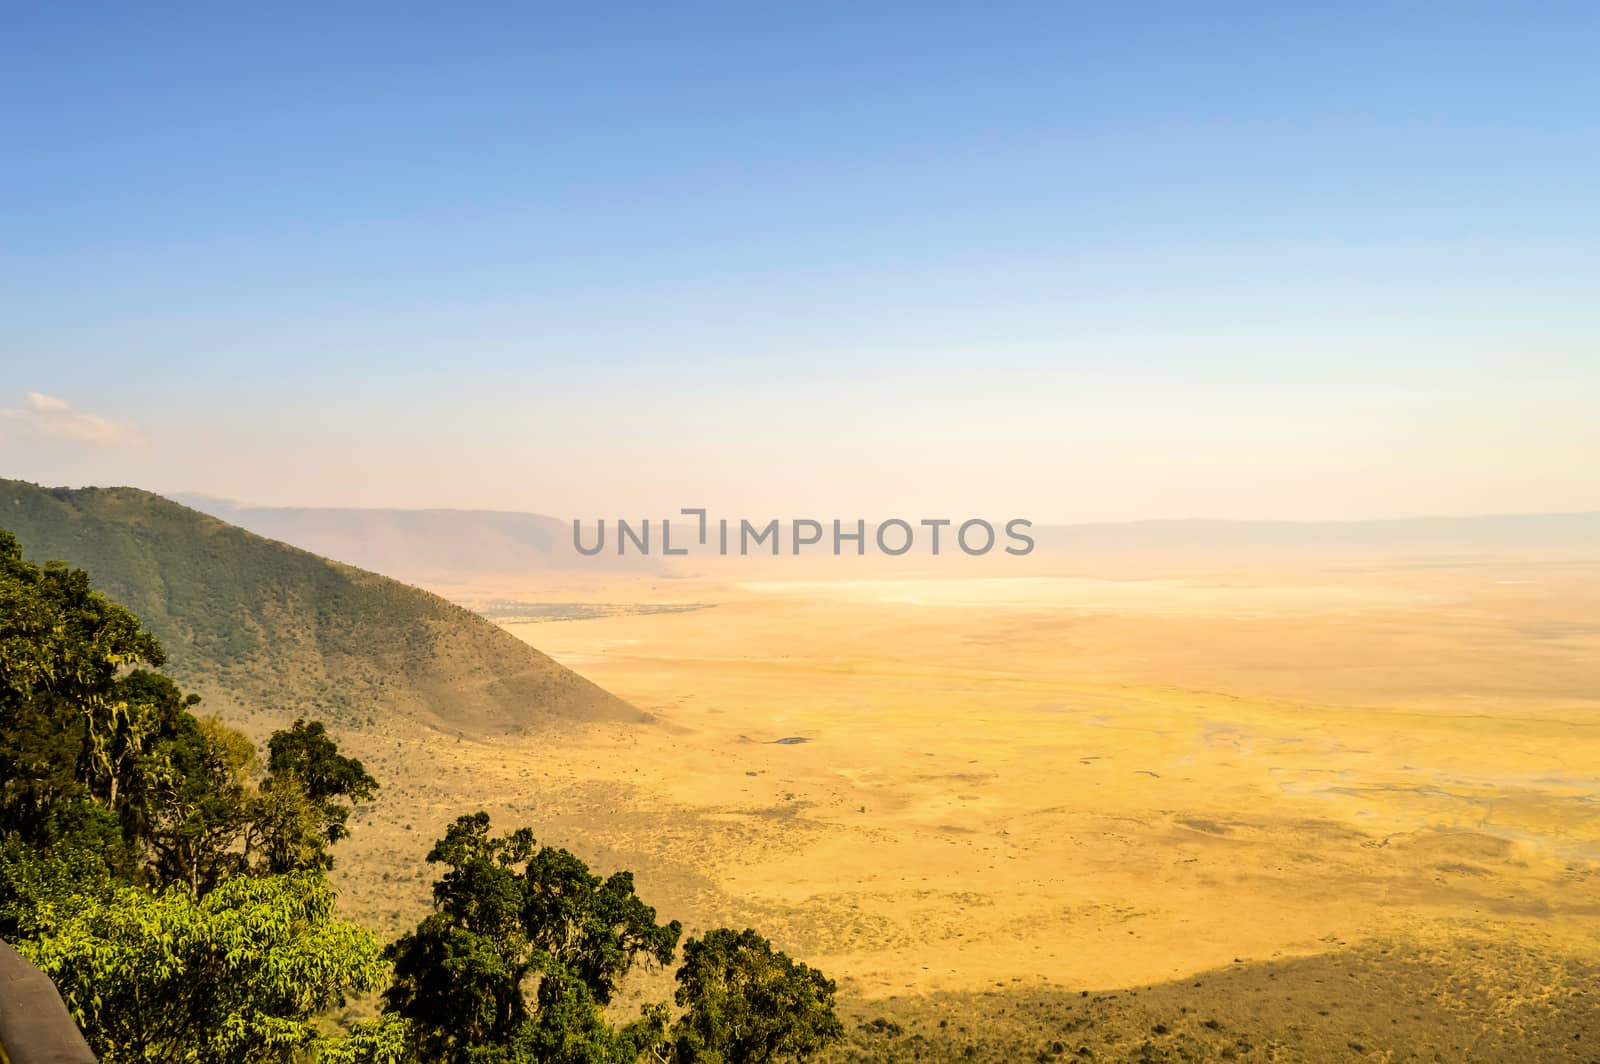 Elevated view of the ground of the Ngorongoro crater from the southern edge of the crater. Looking towards the forest of Lerai and the alkaline crater lake, Lake Magadi, with clouds covering the edge on the other side.